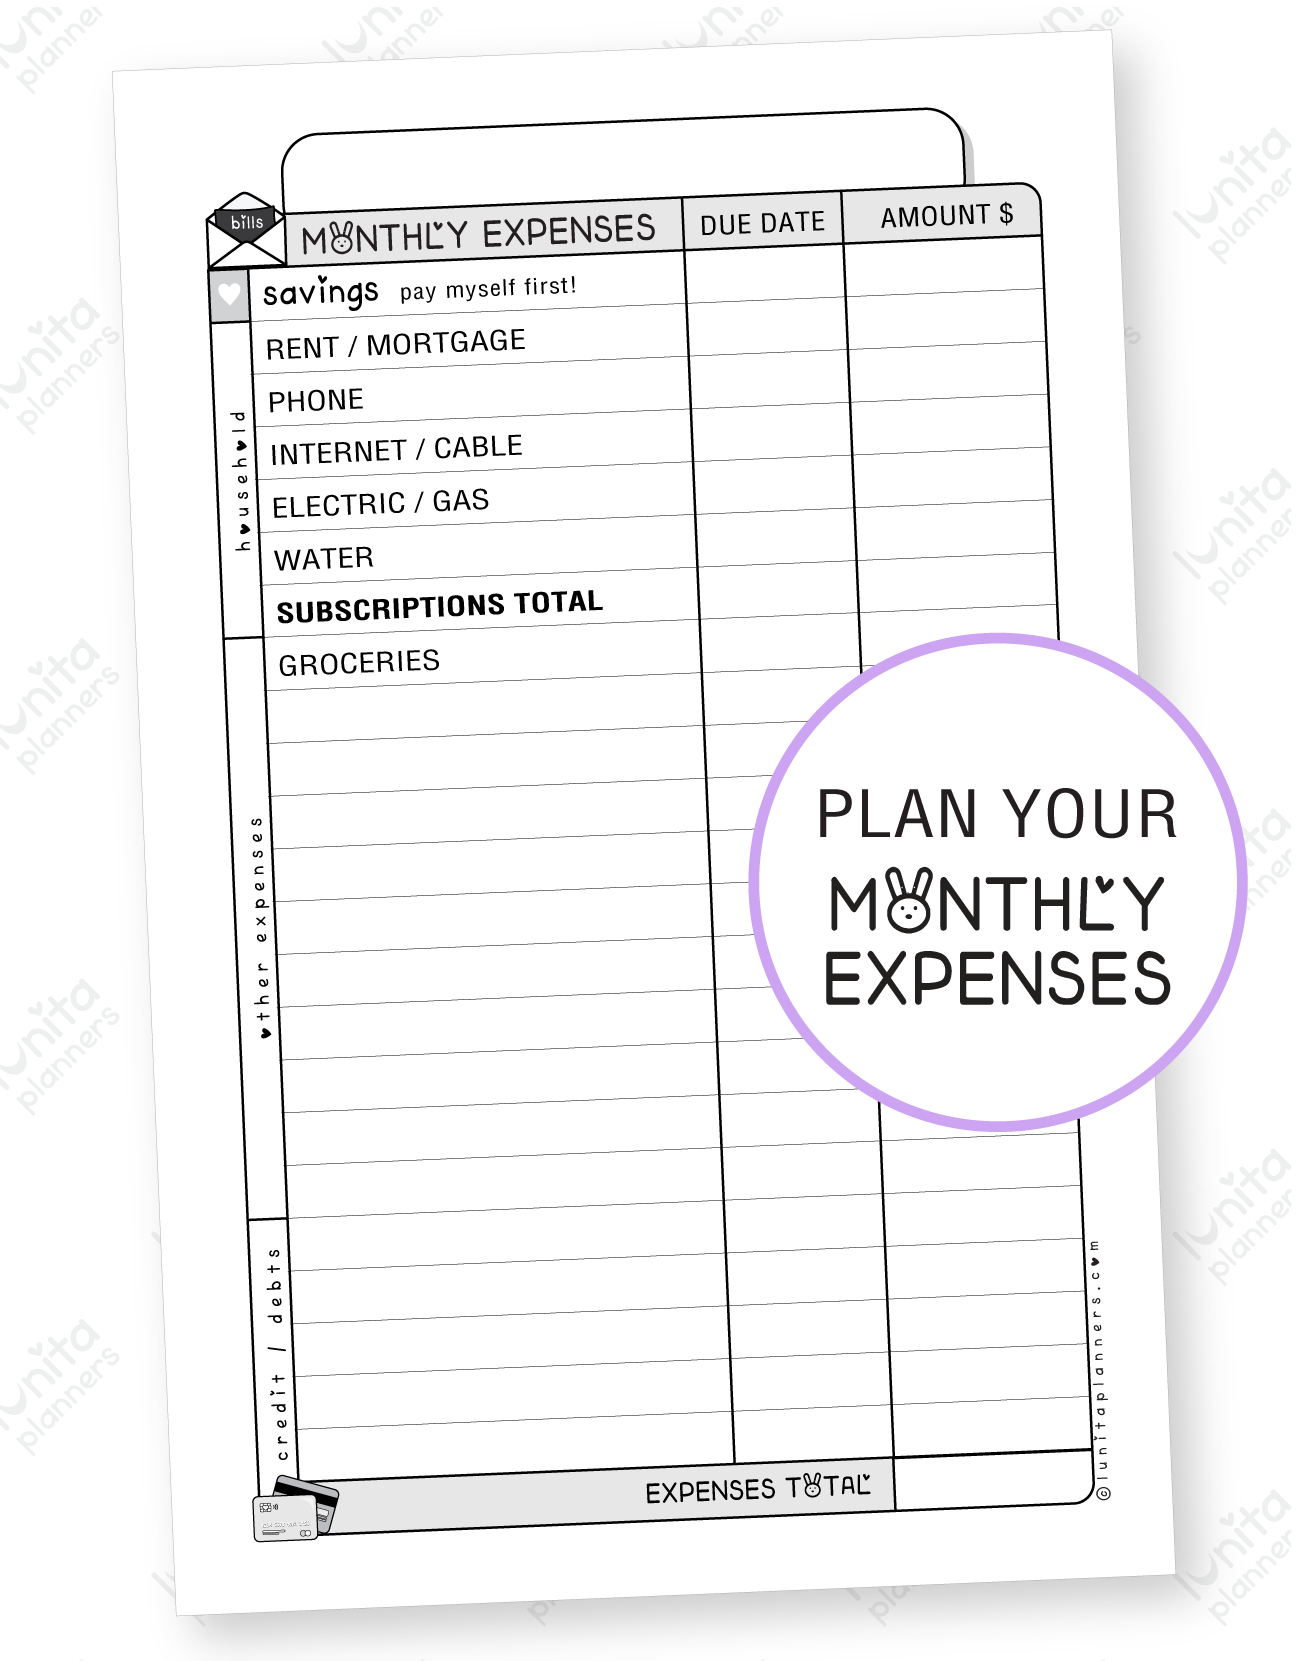 The Super Basic Budget Planner – Lunita Planners